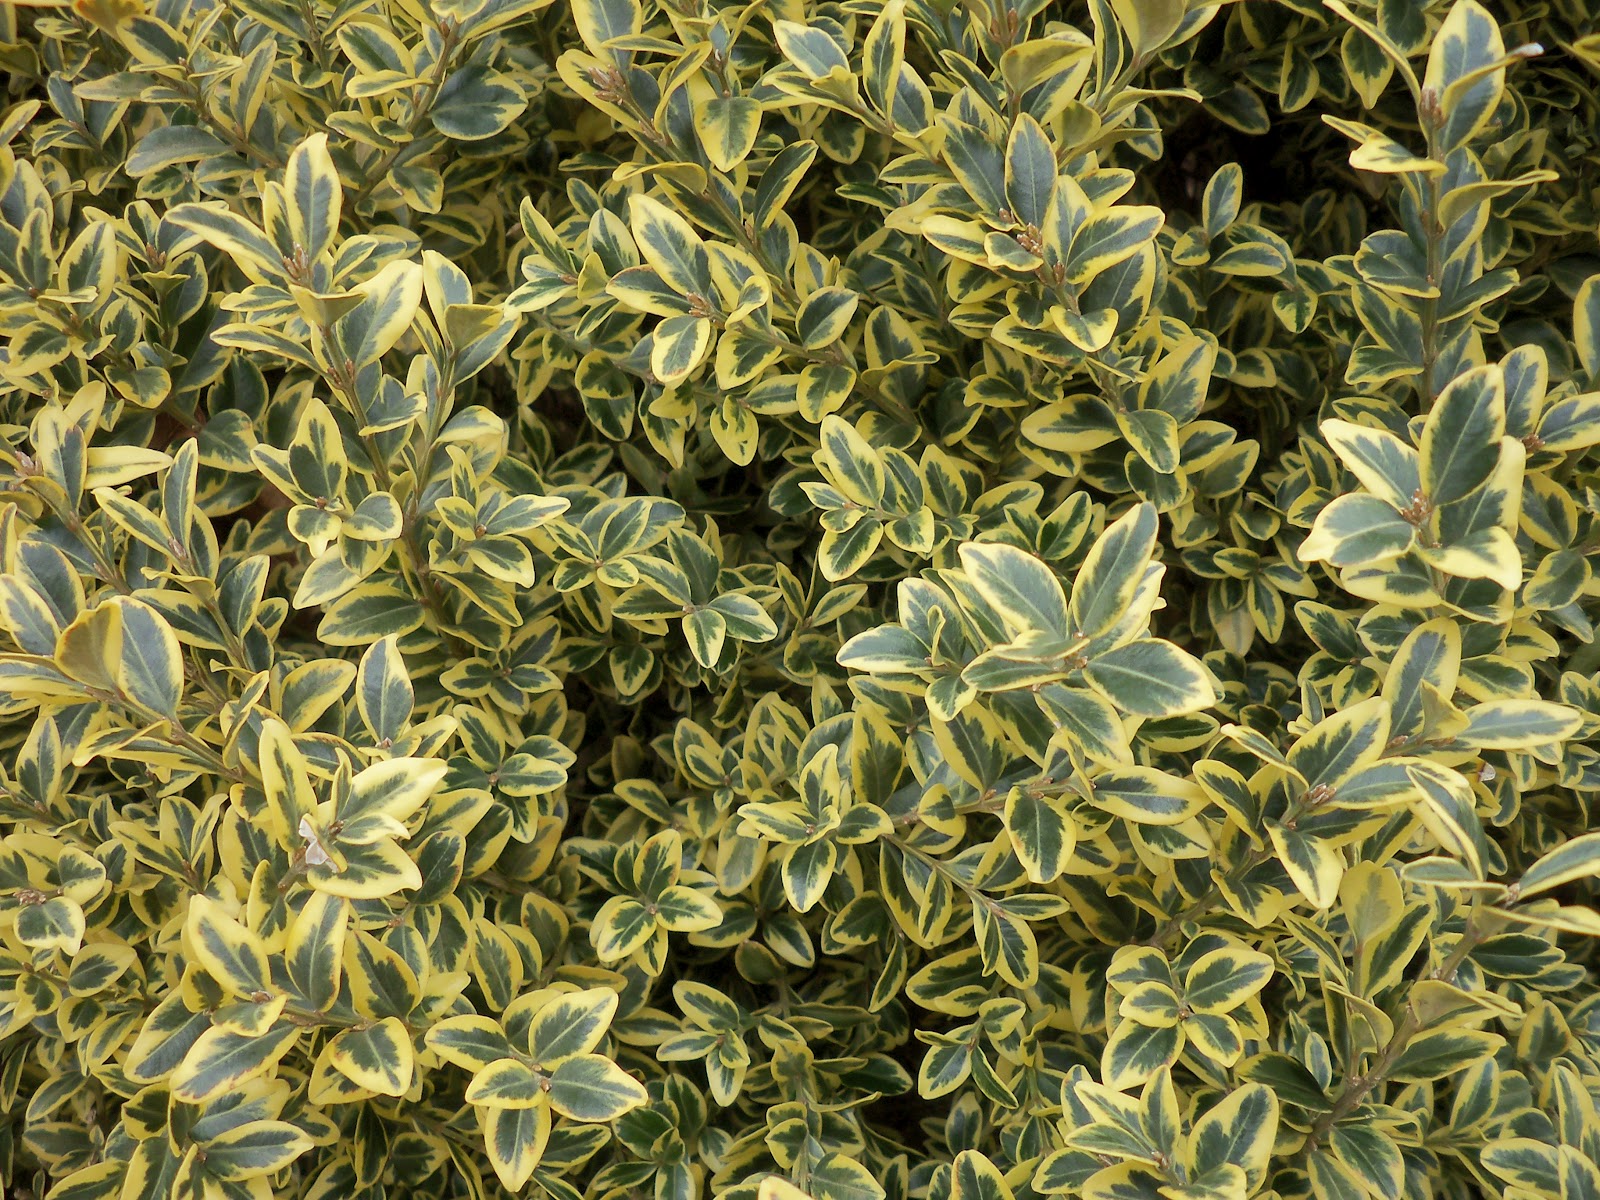 Find Some Euonymus For Your Garden